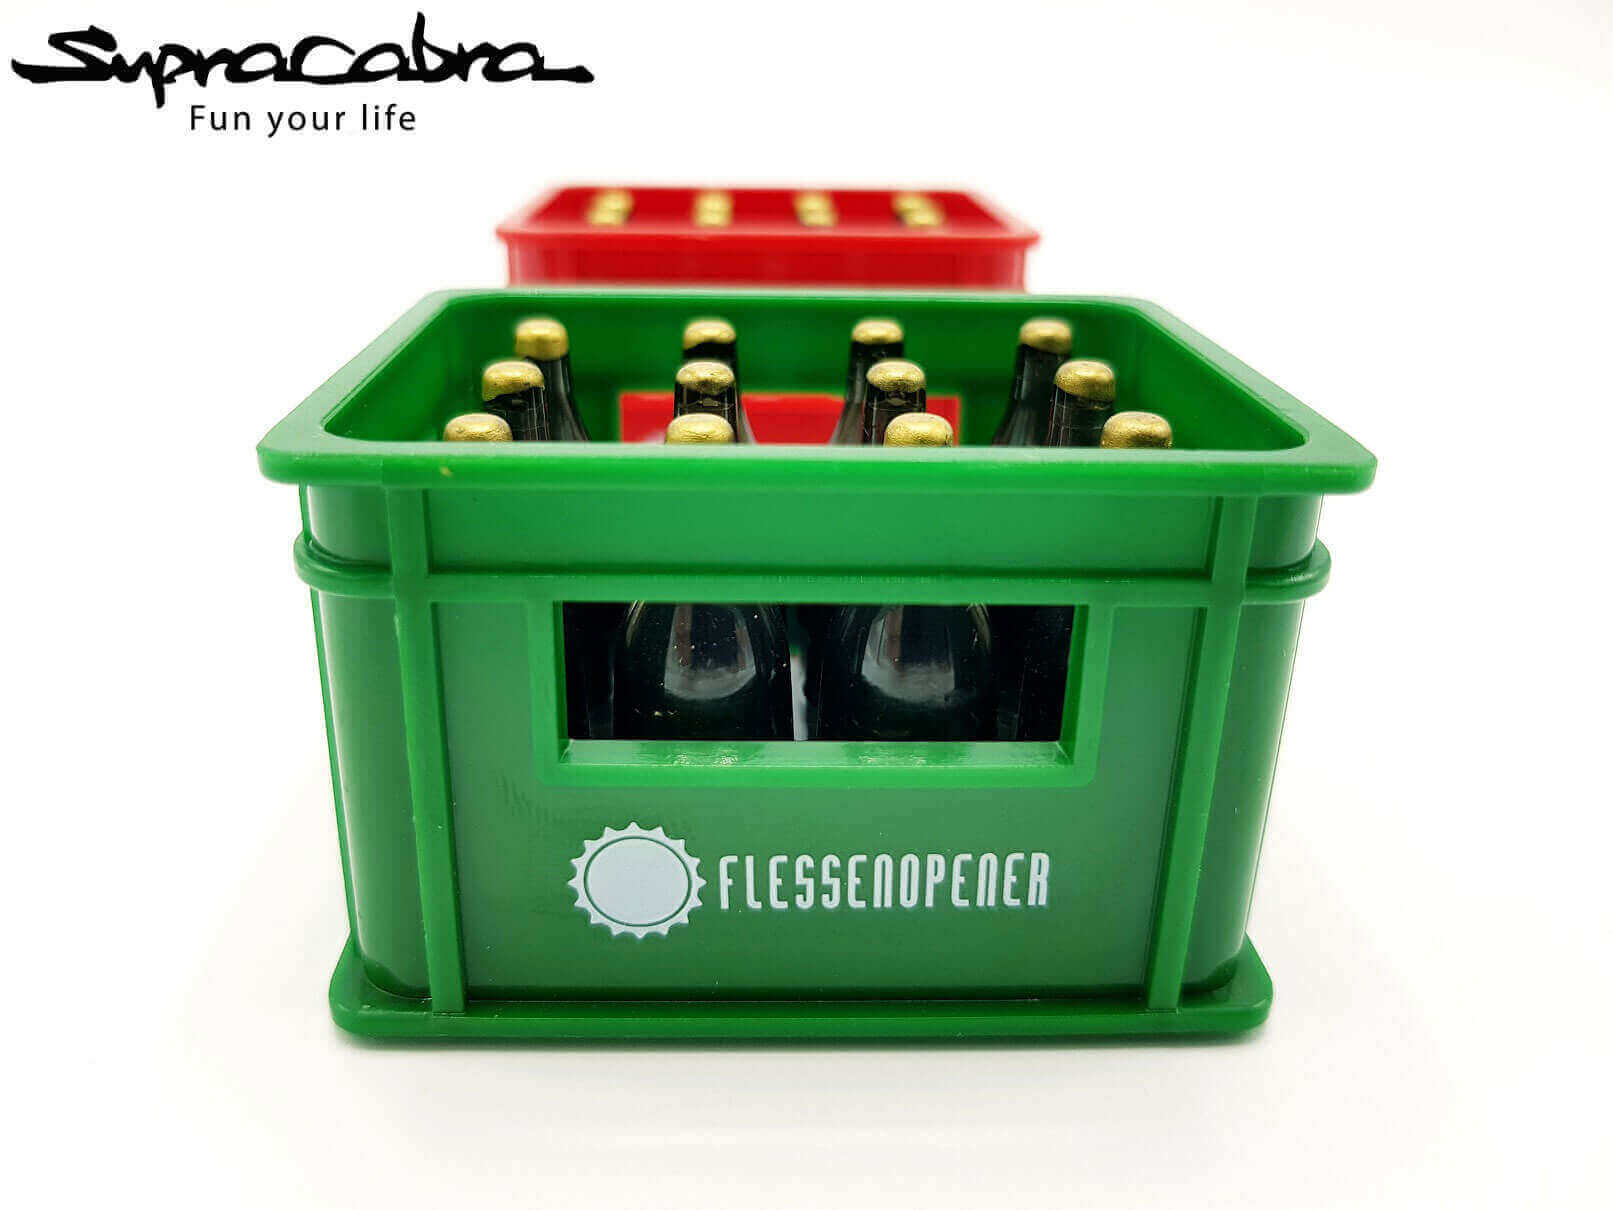 https://supracabra.com/wp-content/uploads/2018/06/Crate-Of-Beer-Bottle-Opener-Red-or-Green-green-front-by-Supracabra.com-Fun-your-life.jpg